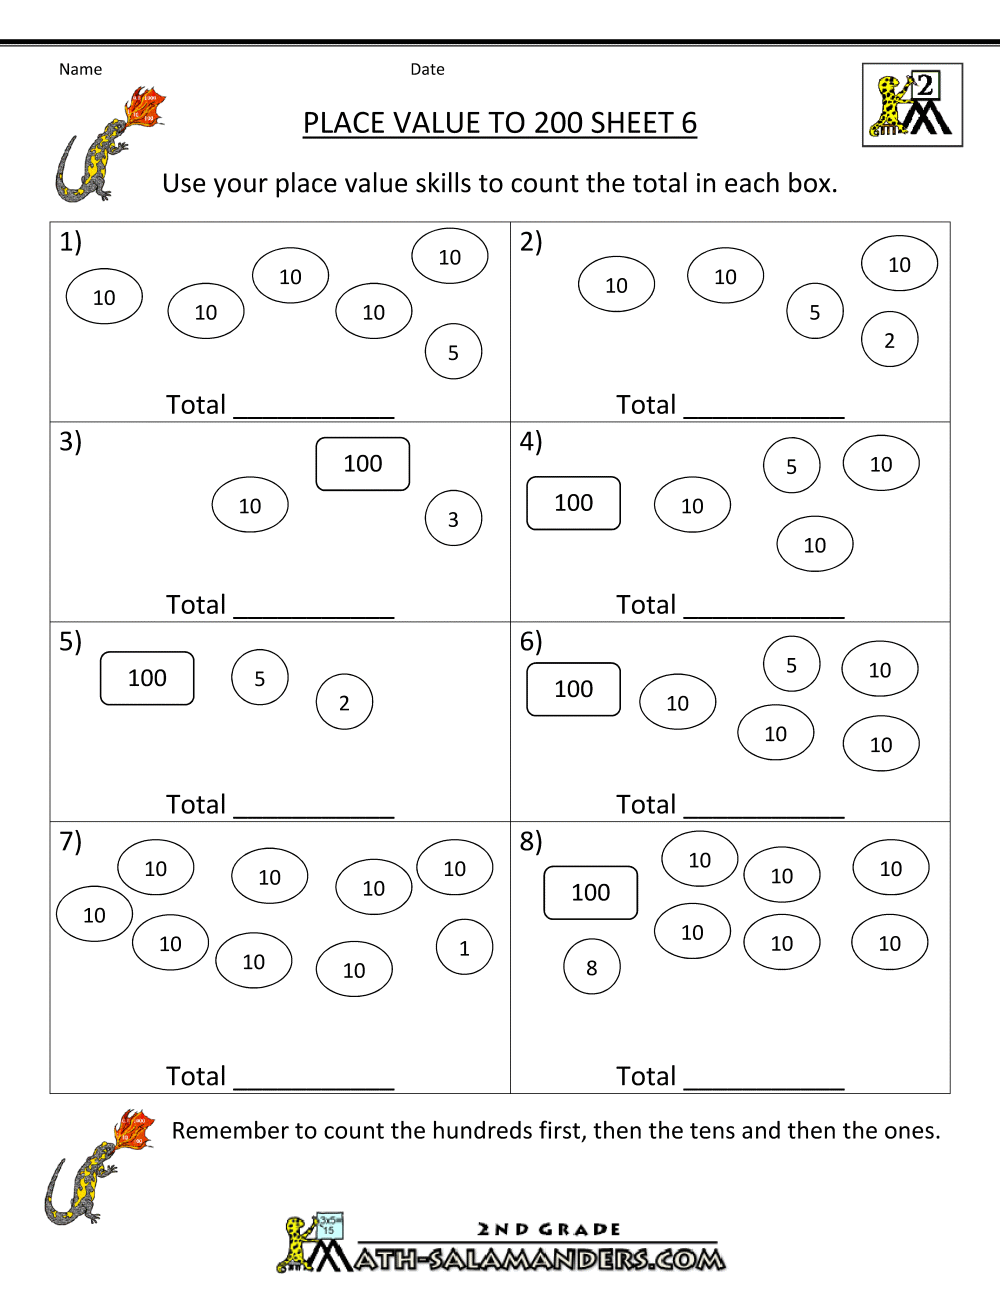 Place Value Worksheet - numbers to 200